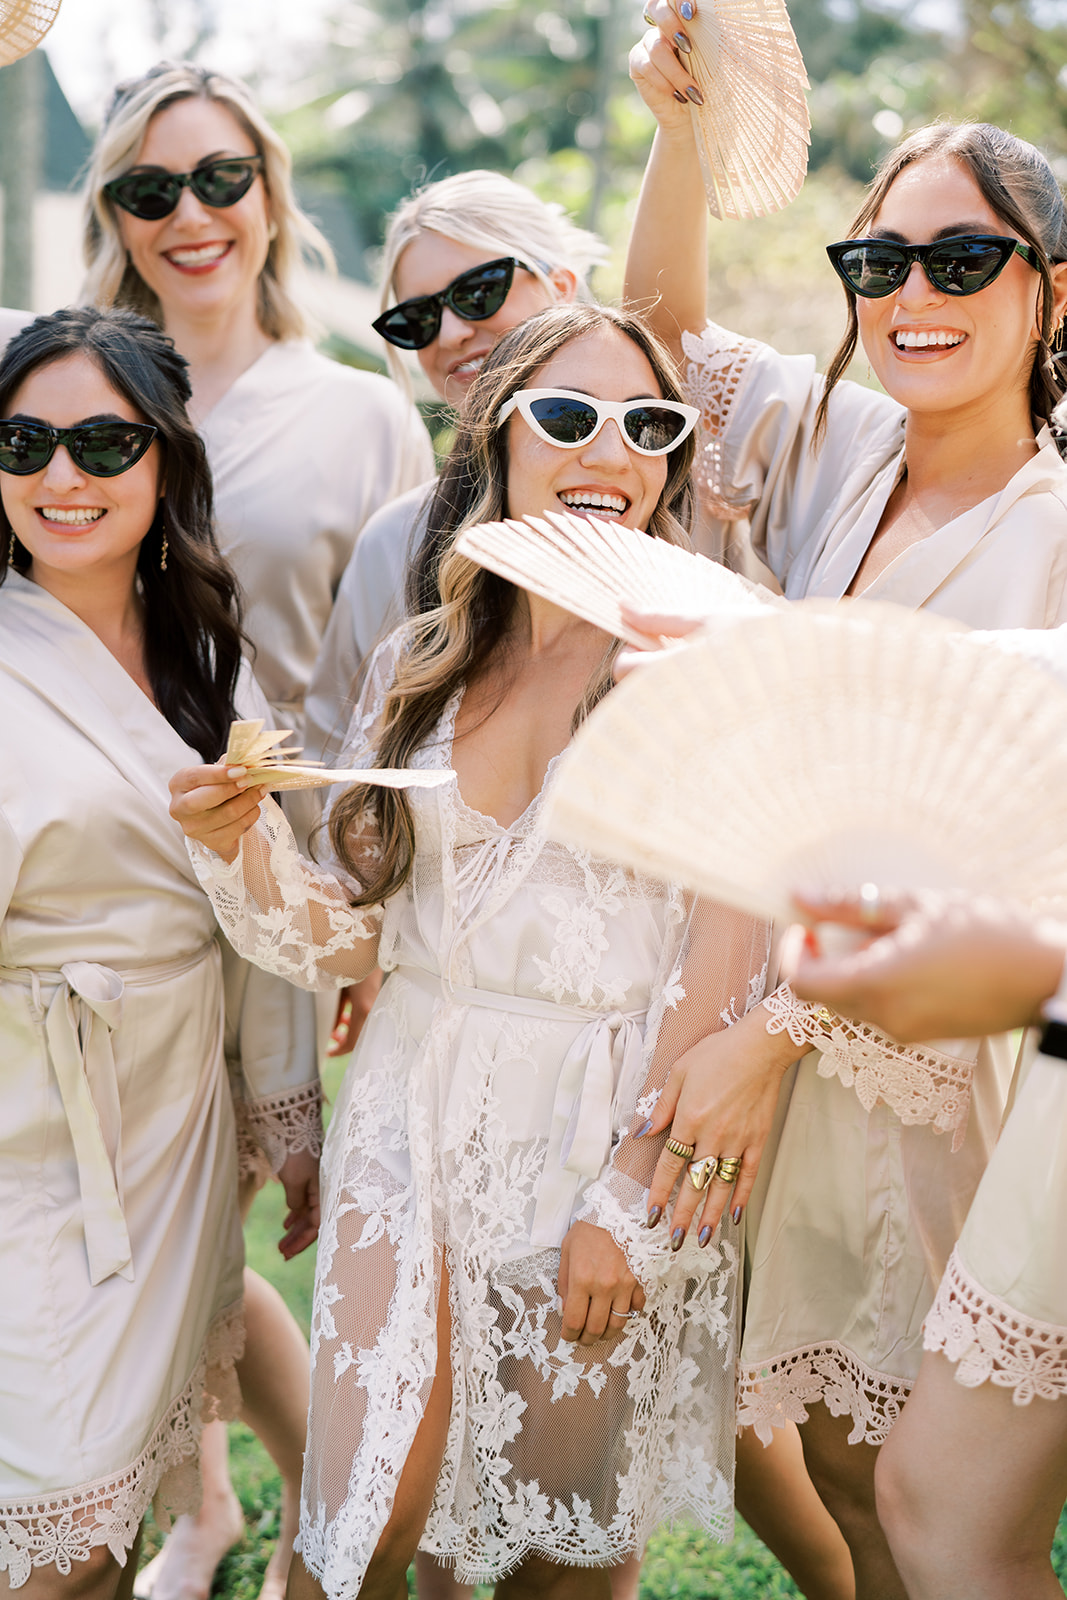 Women smiling and wearing sunglasses and matching robes, holding hand fans at a wedding in Kauai